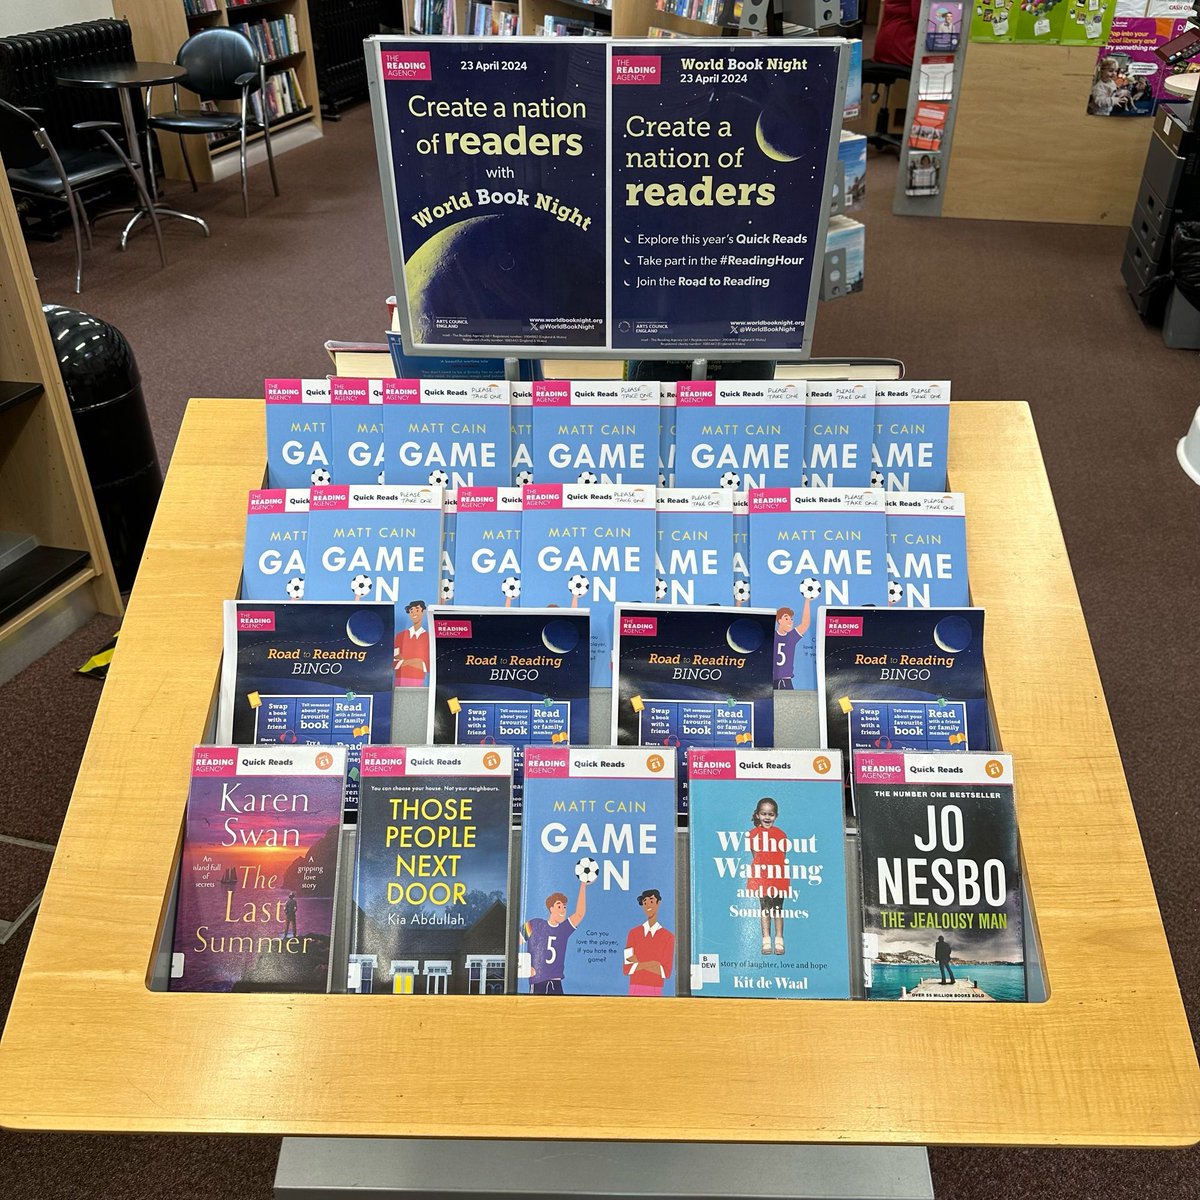 Come in and collect your FREE book of #GameOn by Matt Craig and celebrate #WorldBookNight with us!

@LewishamLibs @readingagency